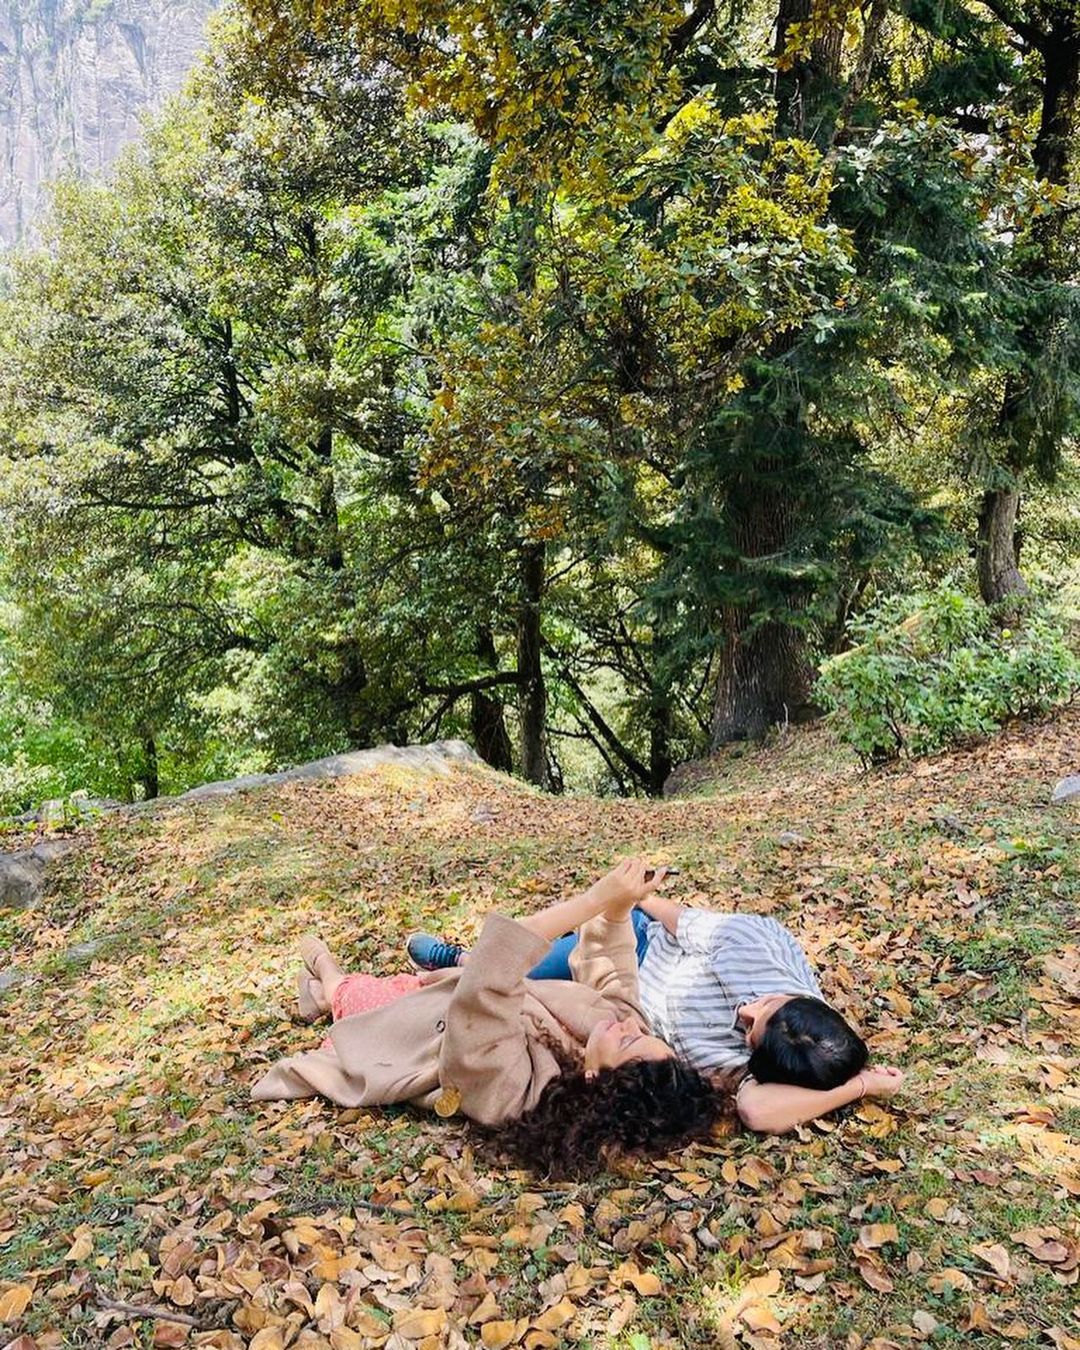 Kangana Ranaut and sister Rangoli spend quality time in the lap of nature.